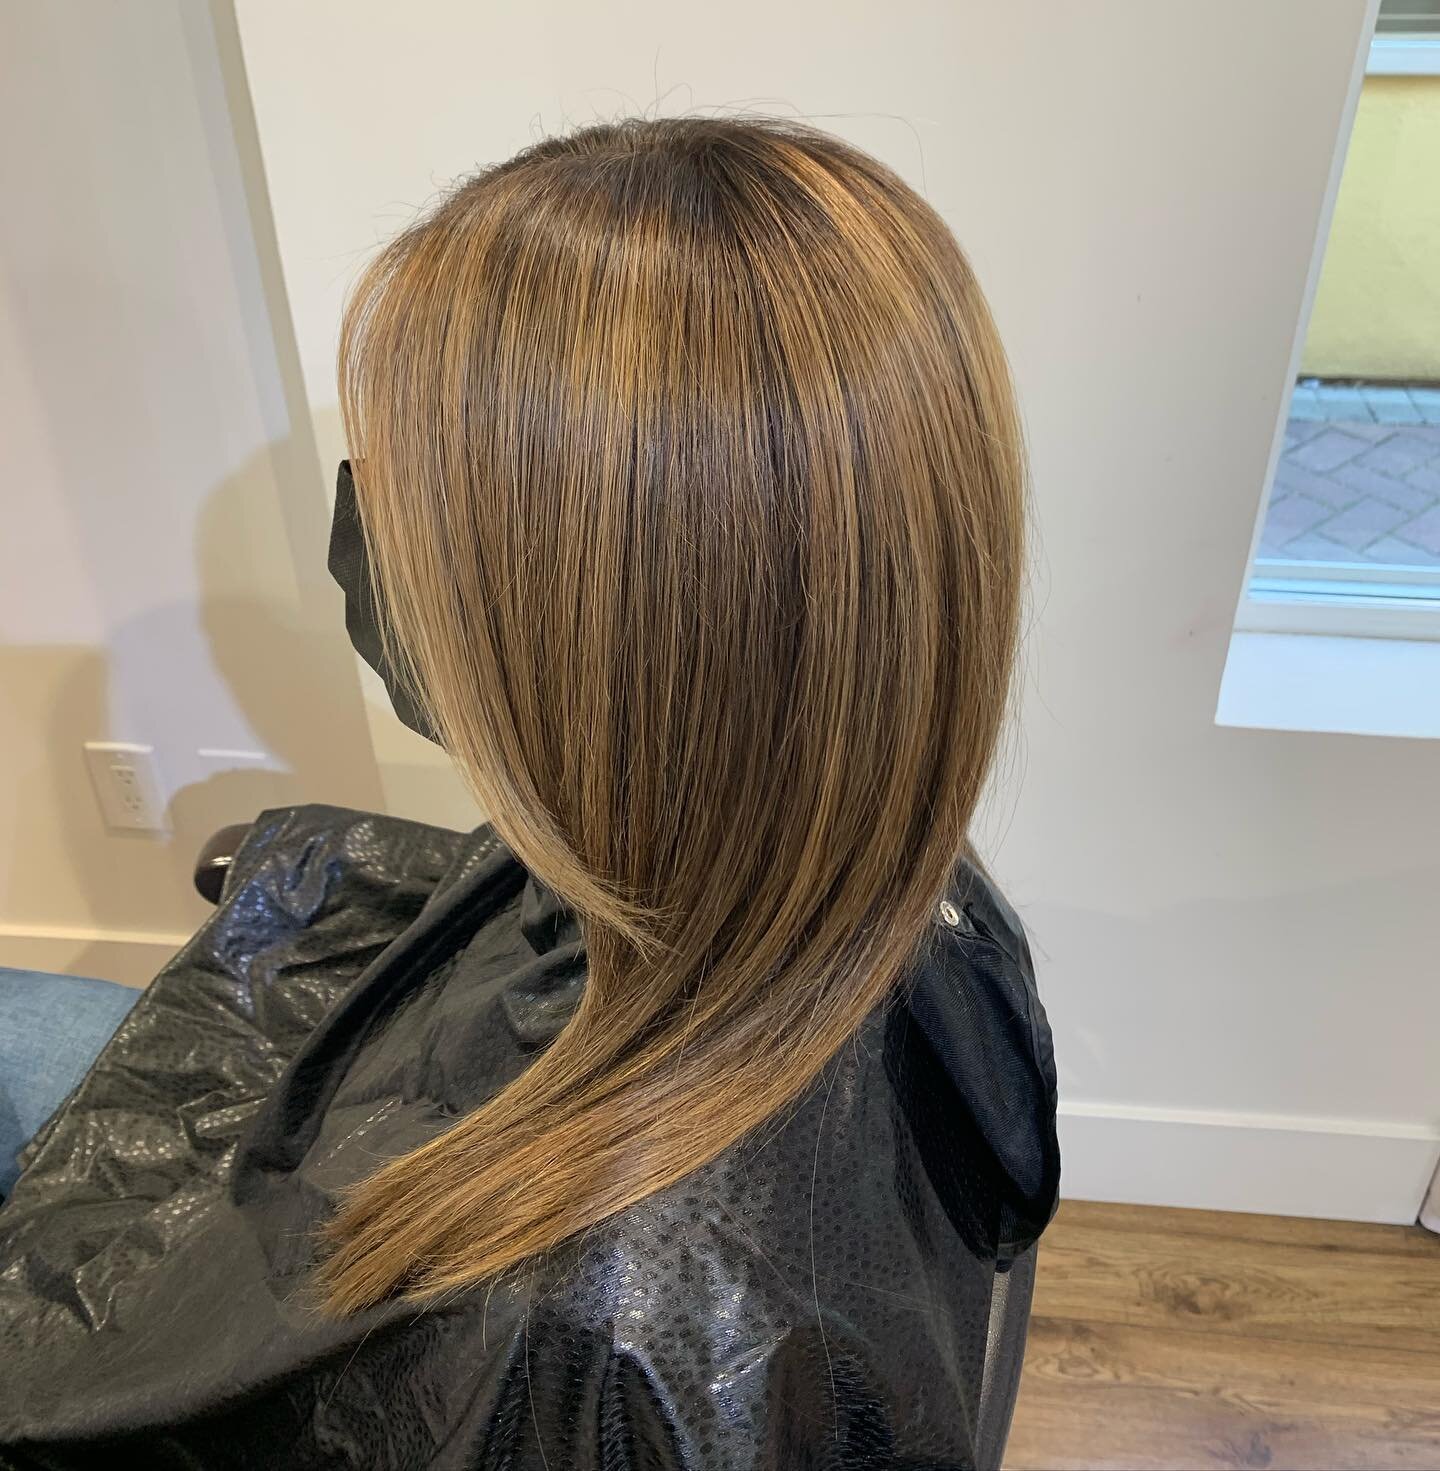 Freshened up her hair by darkening up her root colour, adding lowlites &amp; toning the ends by Stephanie @stephanie.karemaker.hair ❤️ Swipe for Before ⁣⠀
⠀
⠀
#highlights #aveda #yyjaveda #avedacanada #yyjhair #yyjhairstylist #yyjsalon #creamycolour